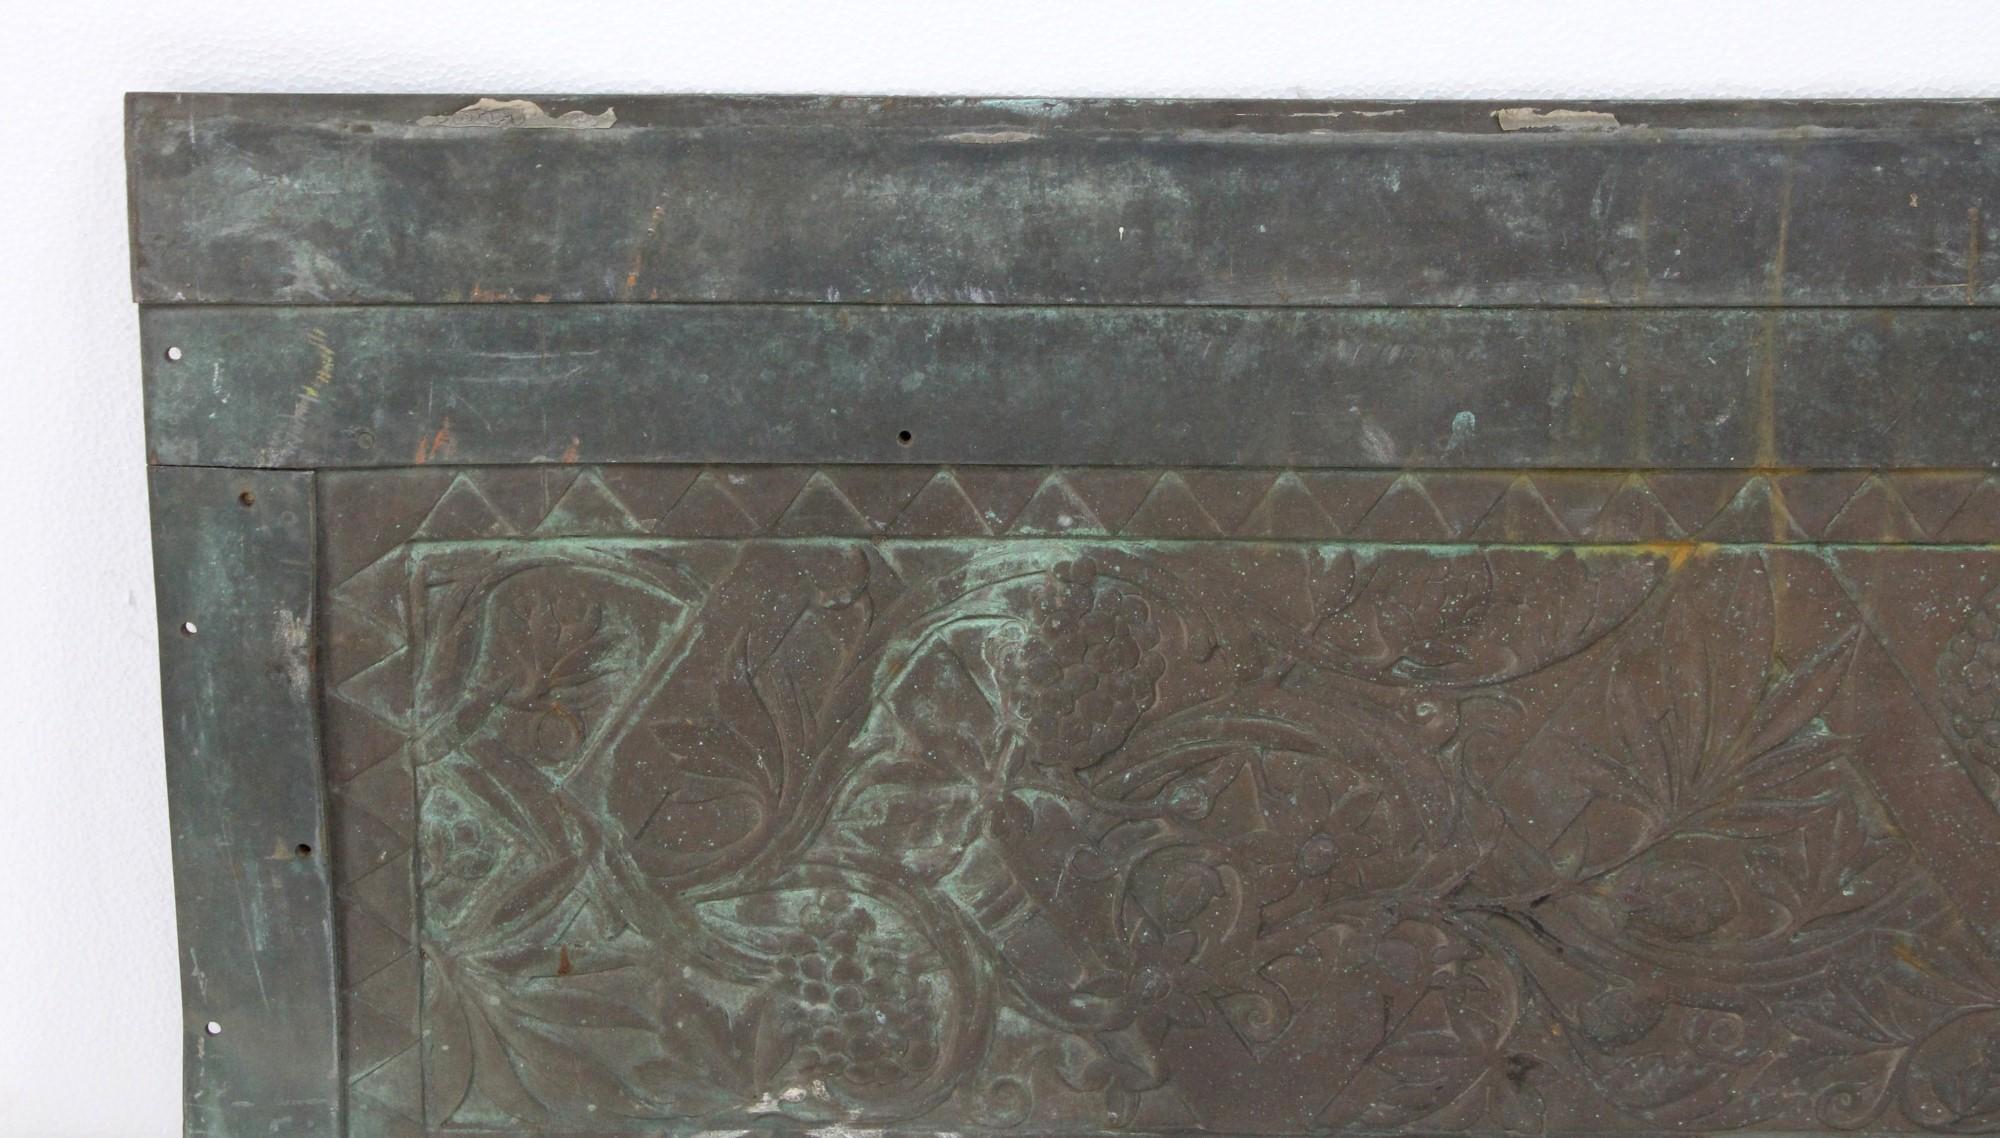 Art Deco bronze panel with decorative grapevines detail from the 1930s. The natural patina has been preserved. Please note, this item is located in our Los Angeles location.